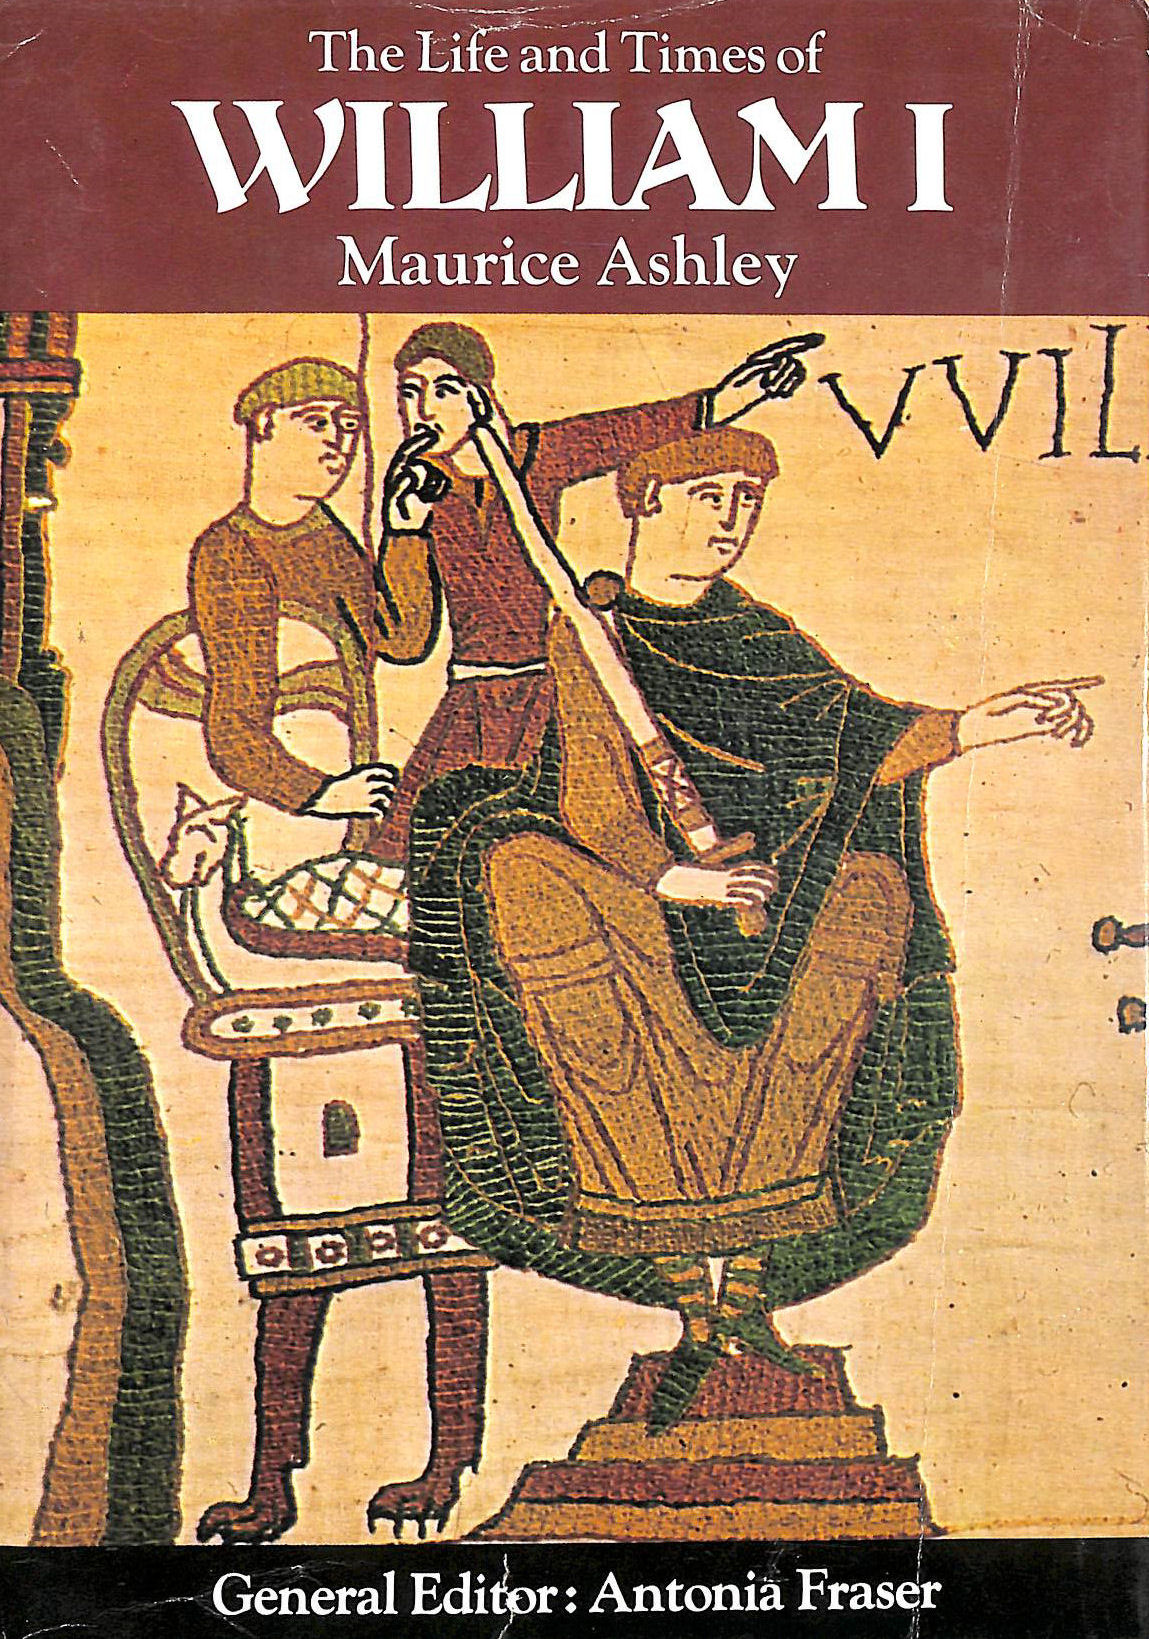 MAURICE ASHLEY - The Life and Times of William I